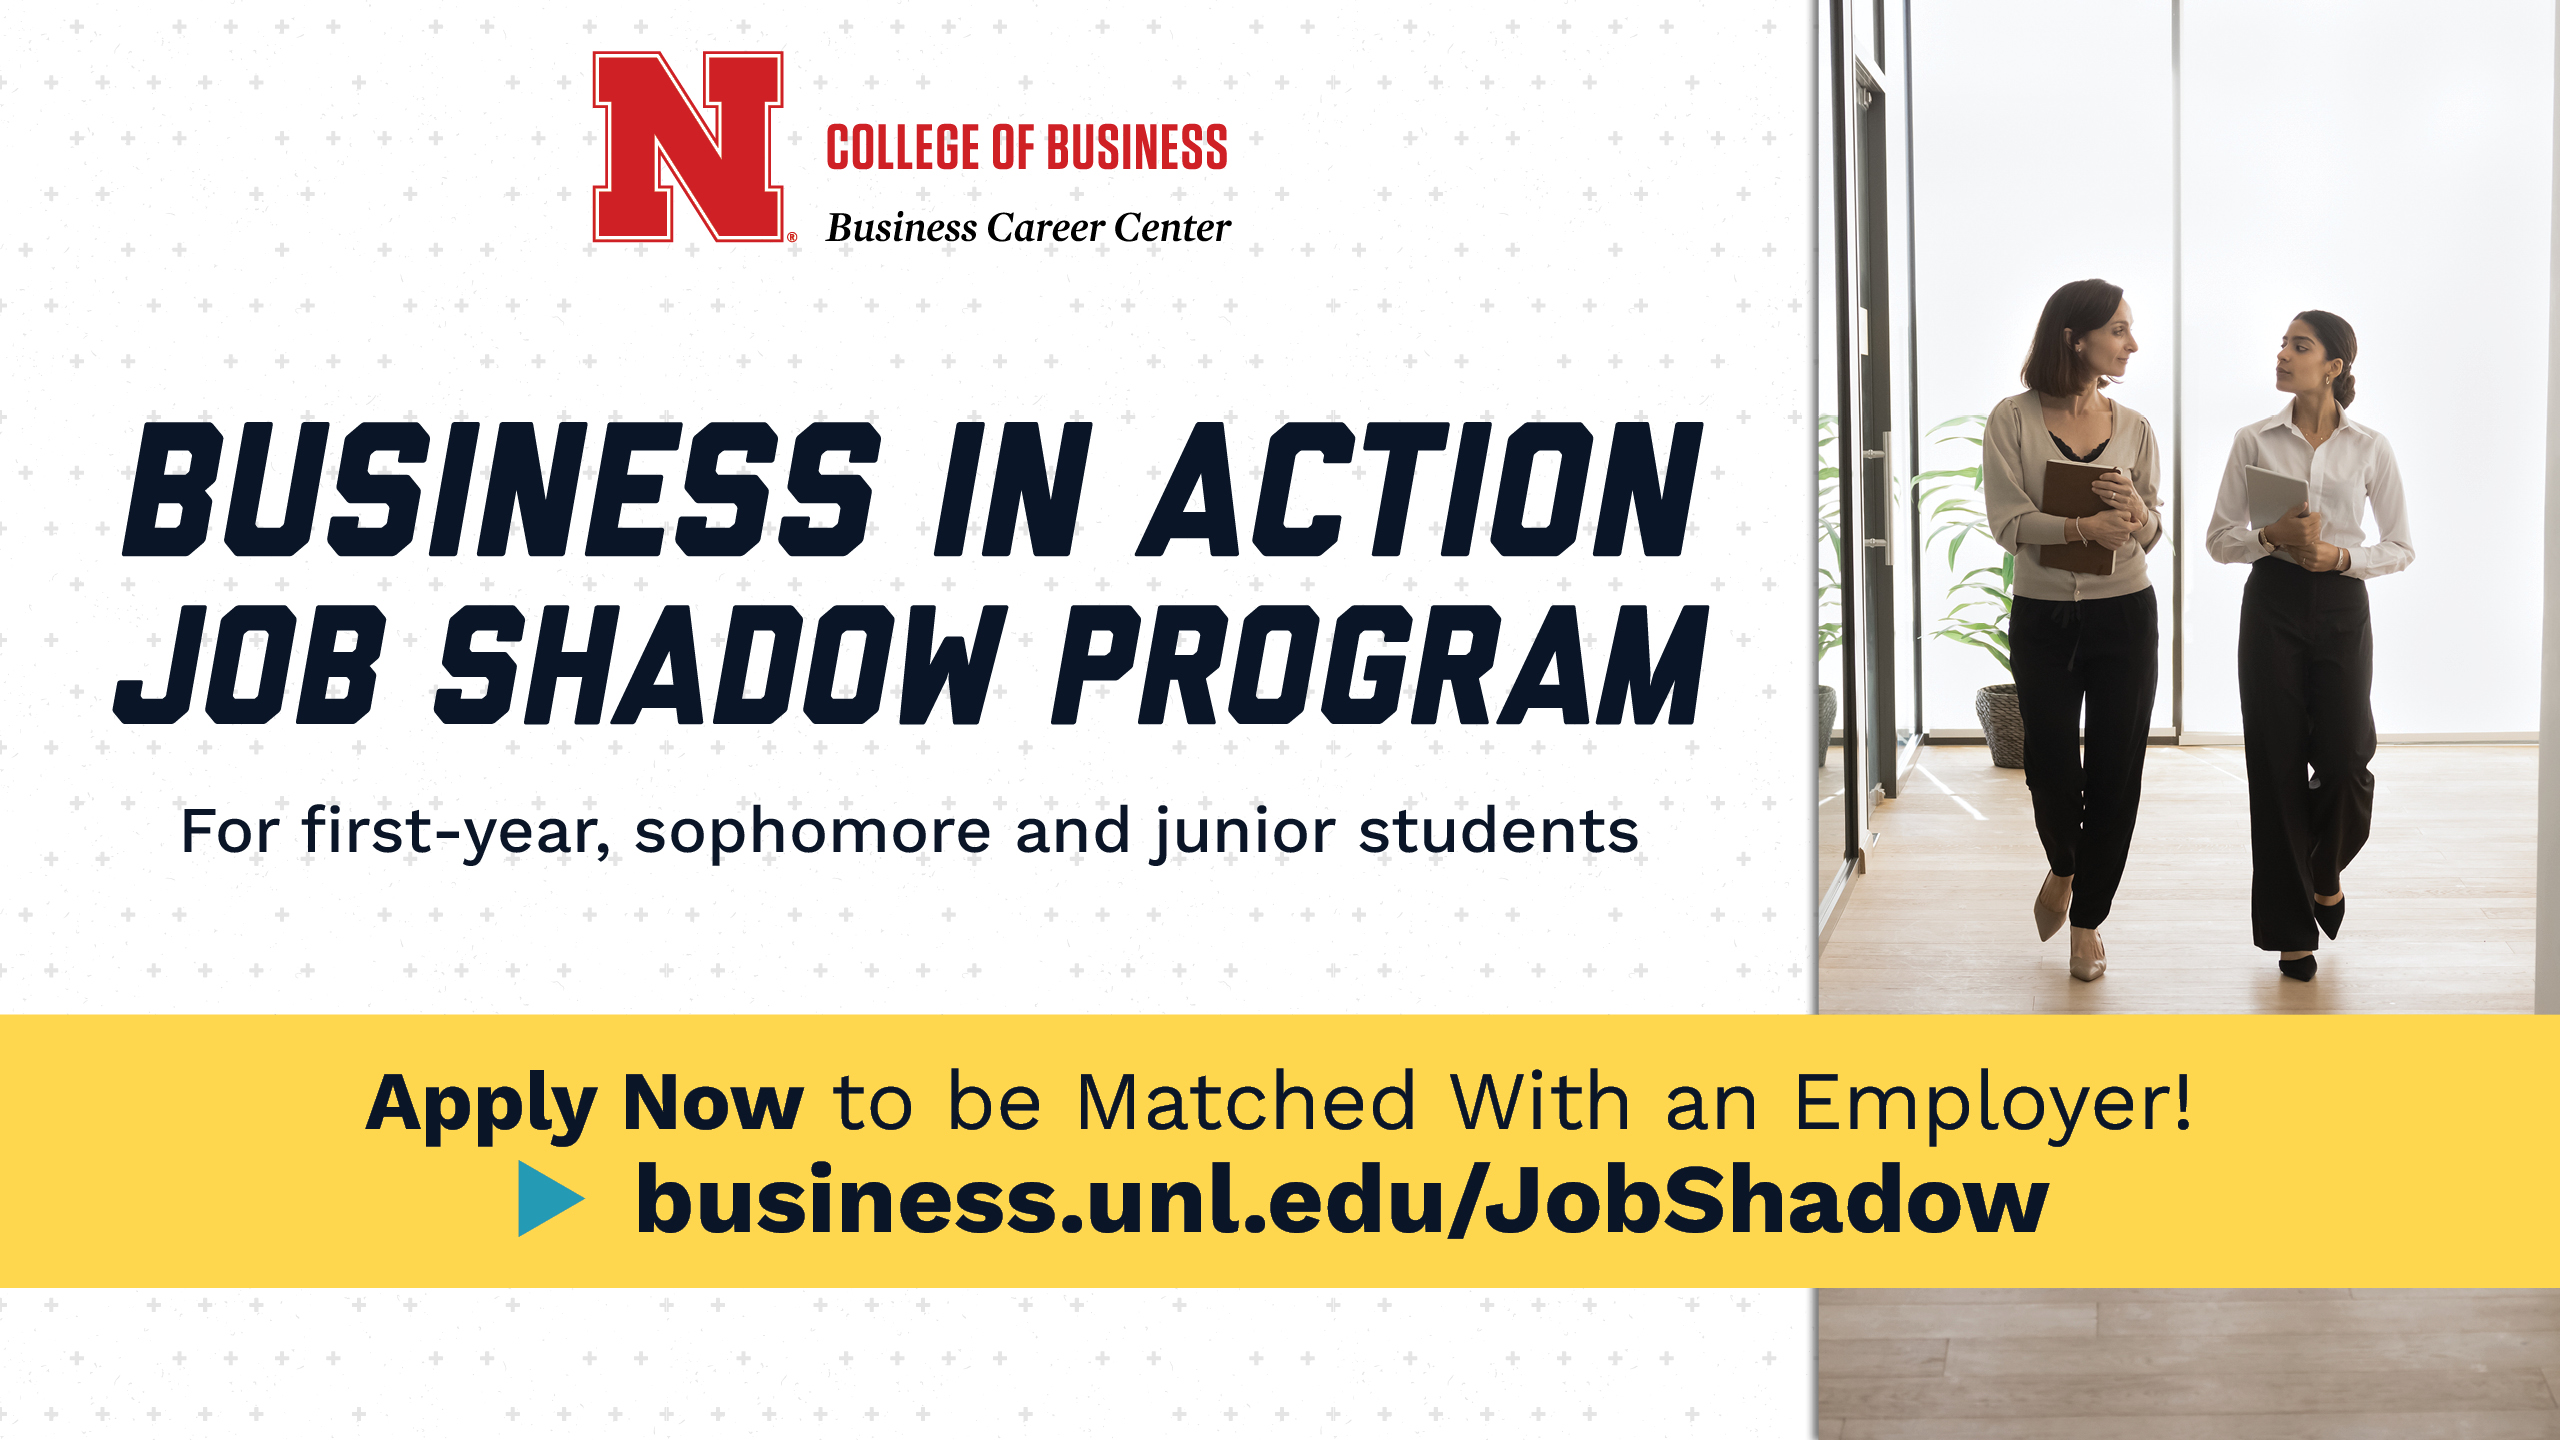 Business in Action Job Shadow Program - APPLY NOW!